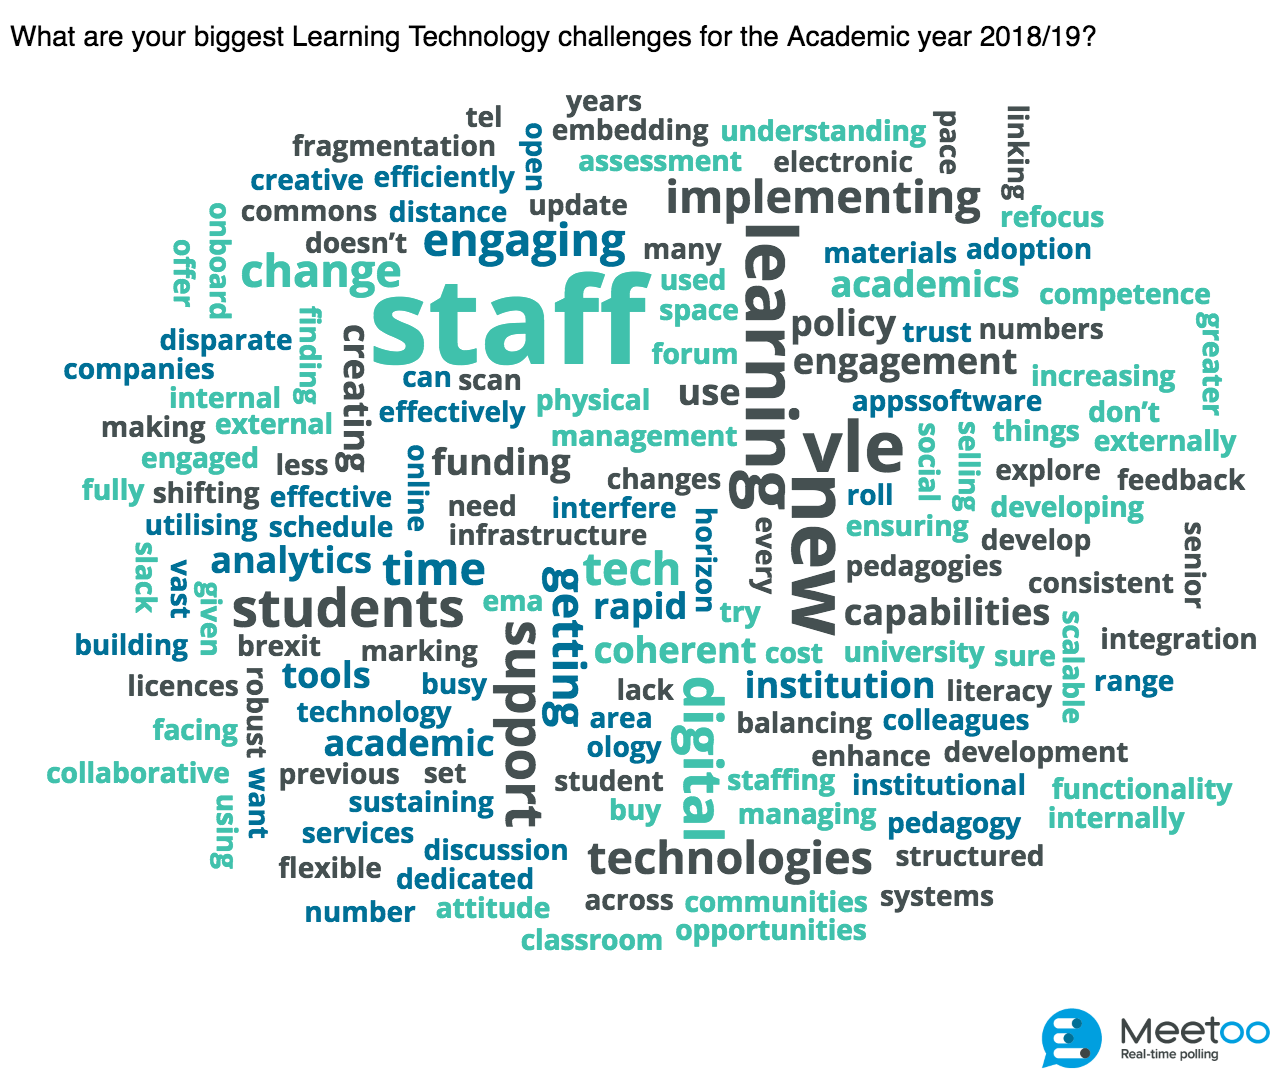 What are the main learning technology challenges for 2019?